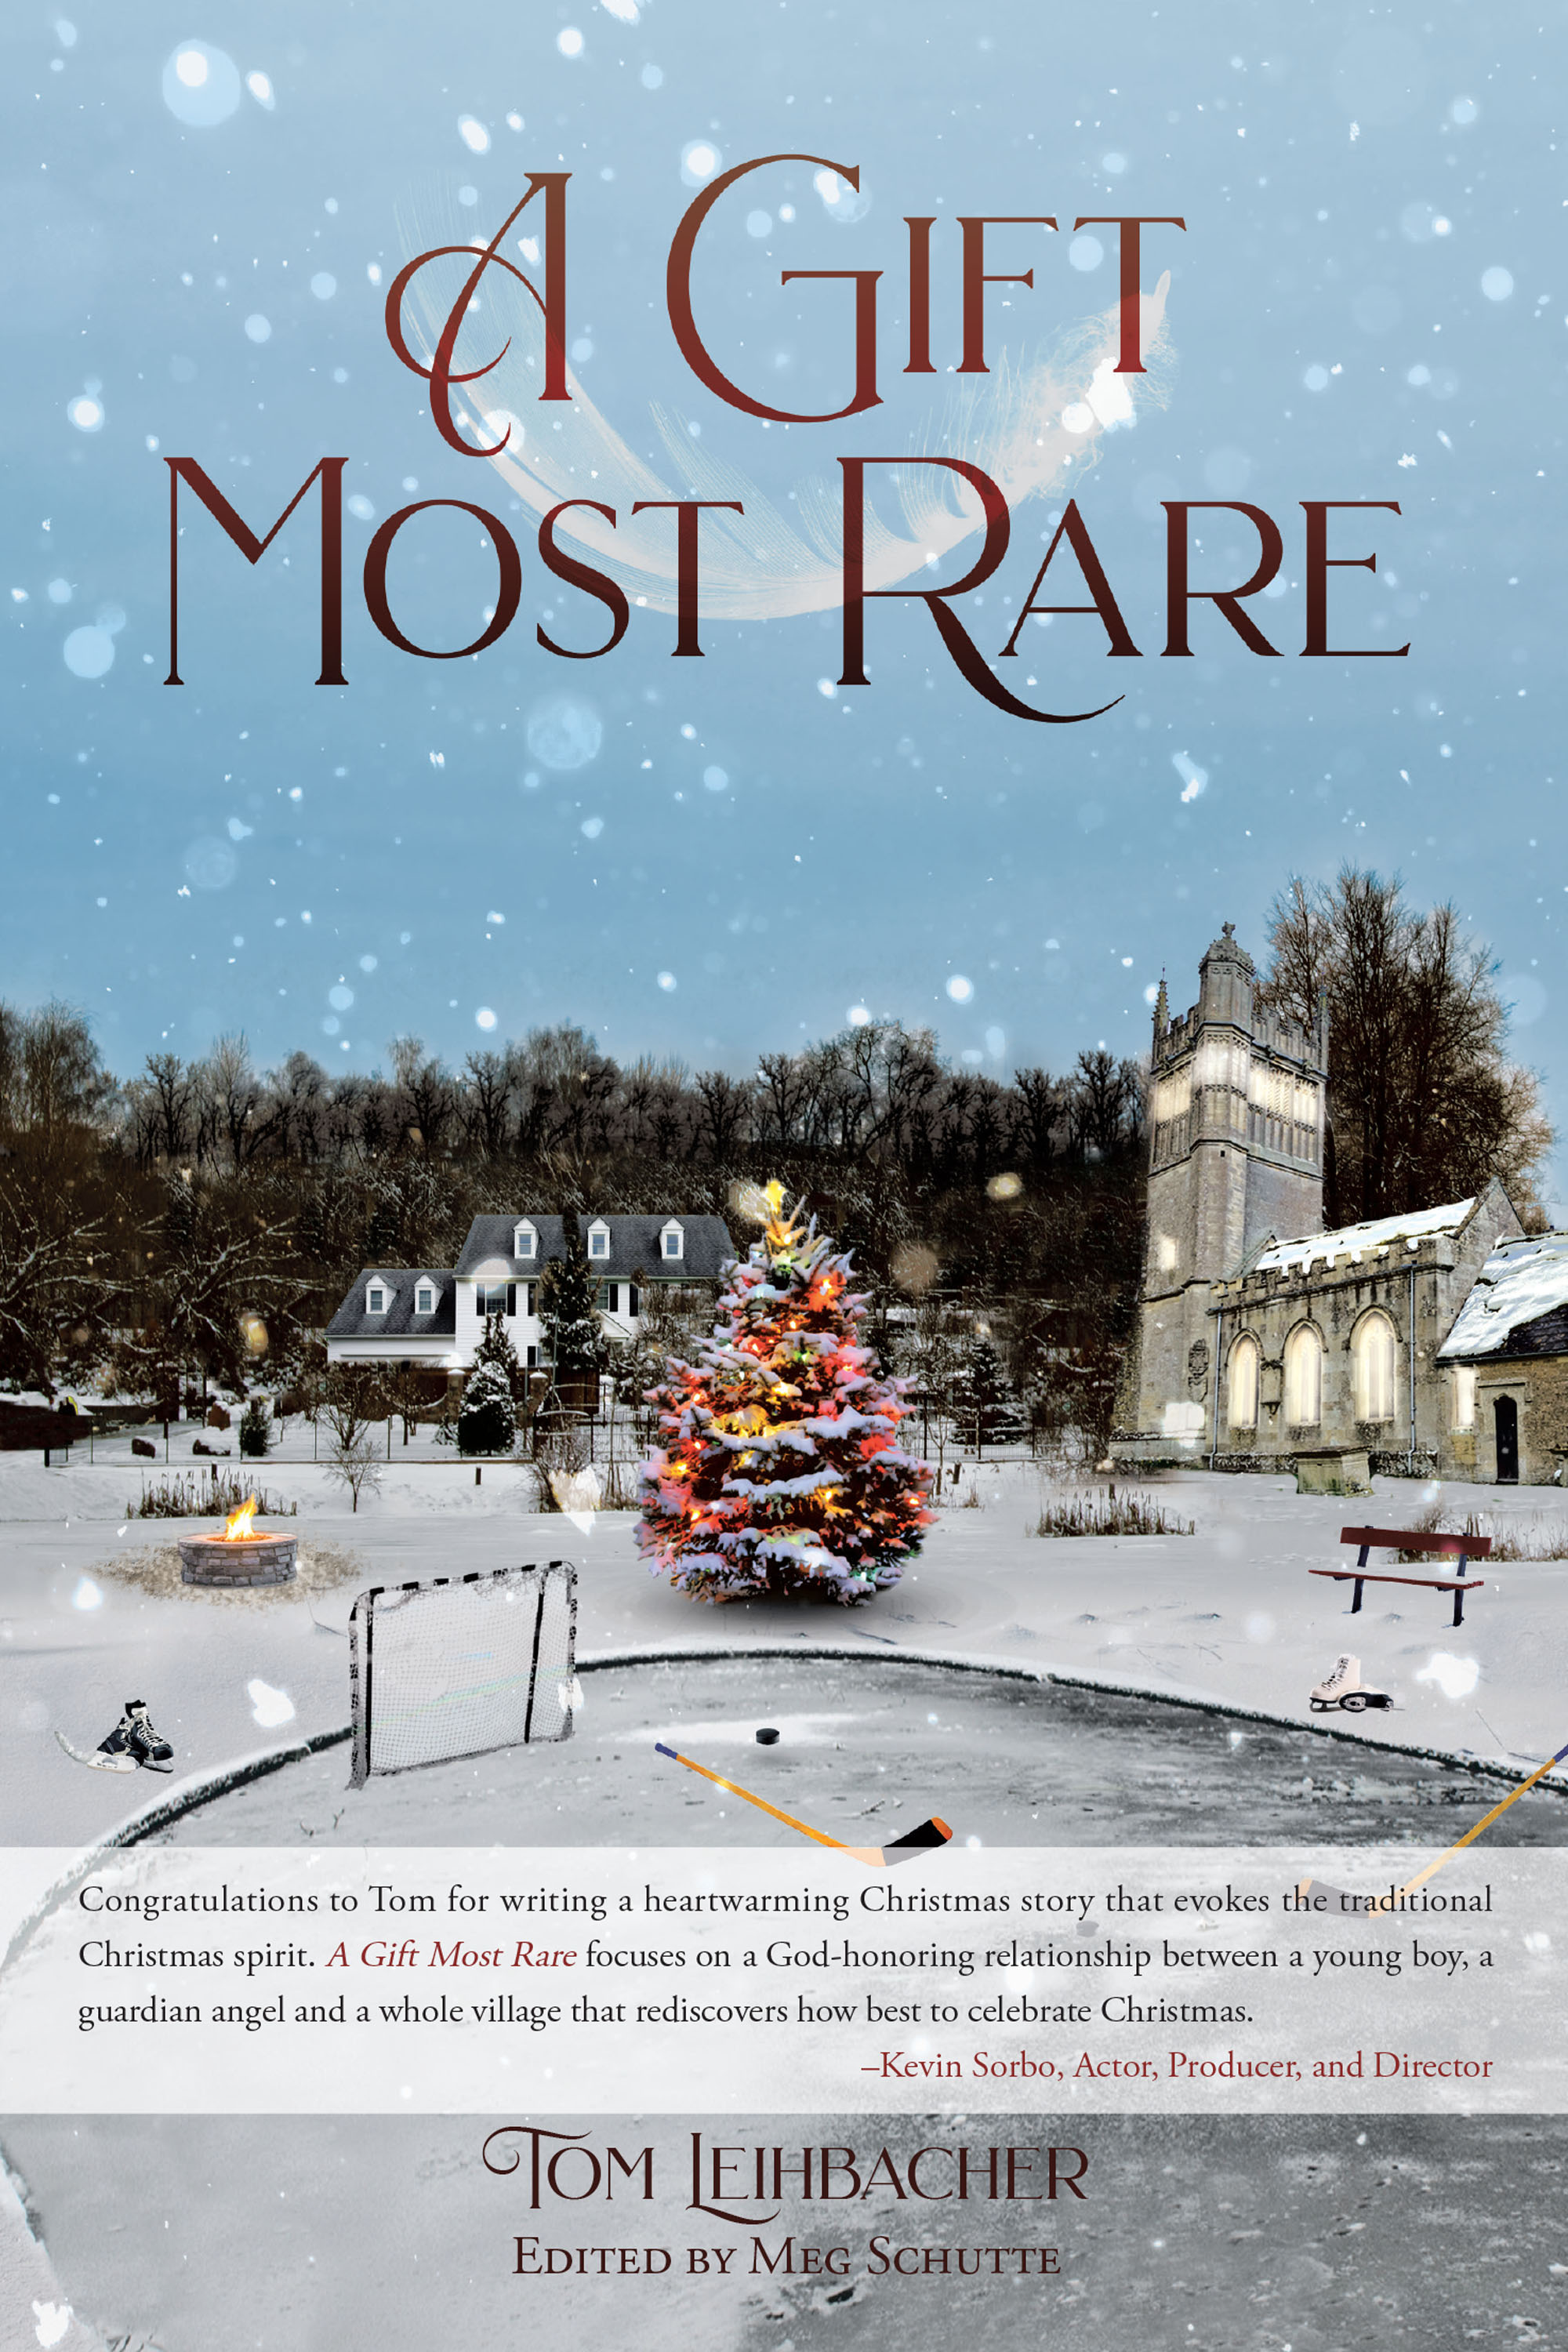 Tom Leihbacher's "A Gift Most Rare" is a Heartwarming, God-Honoring Christmas Story for All Ages